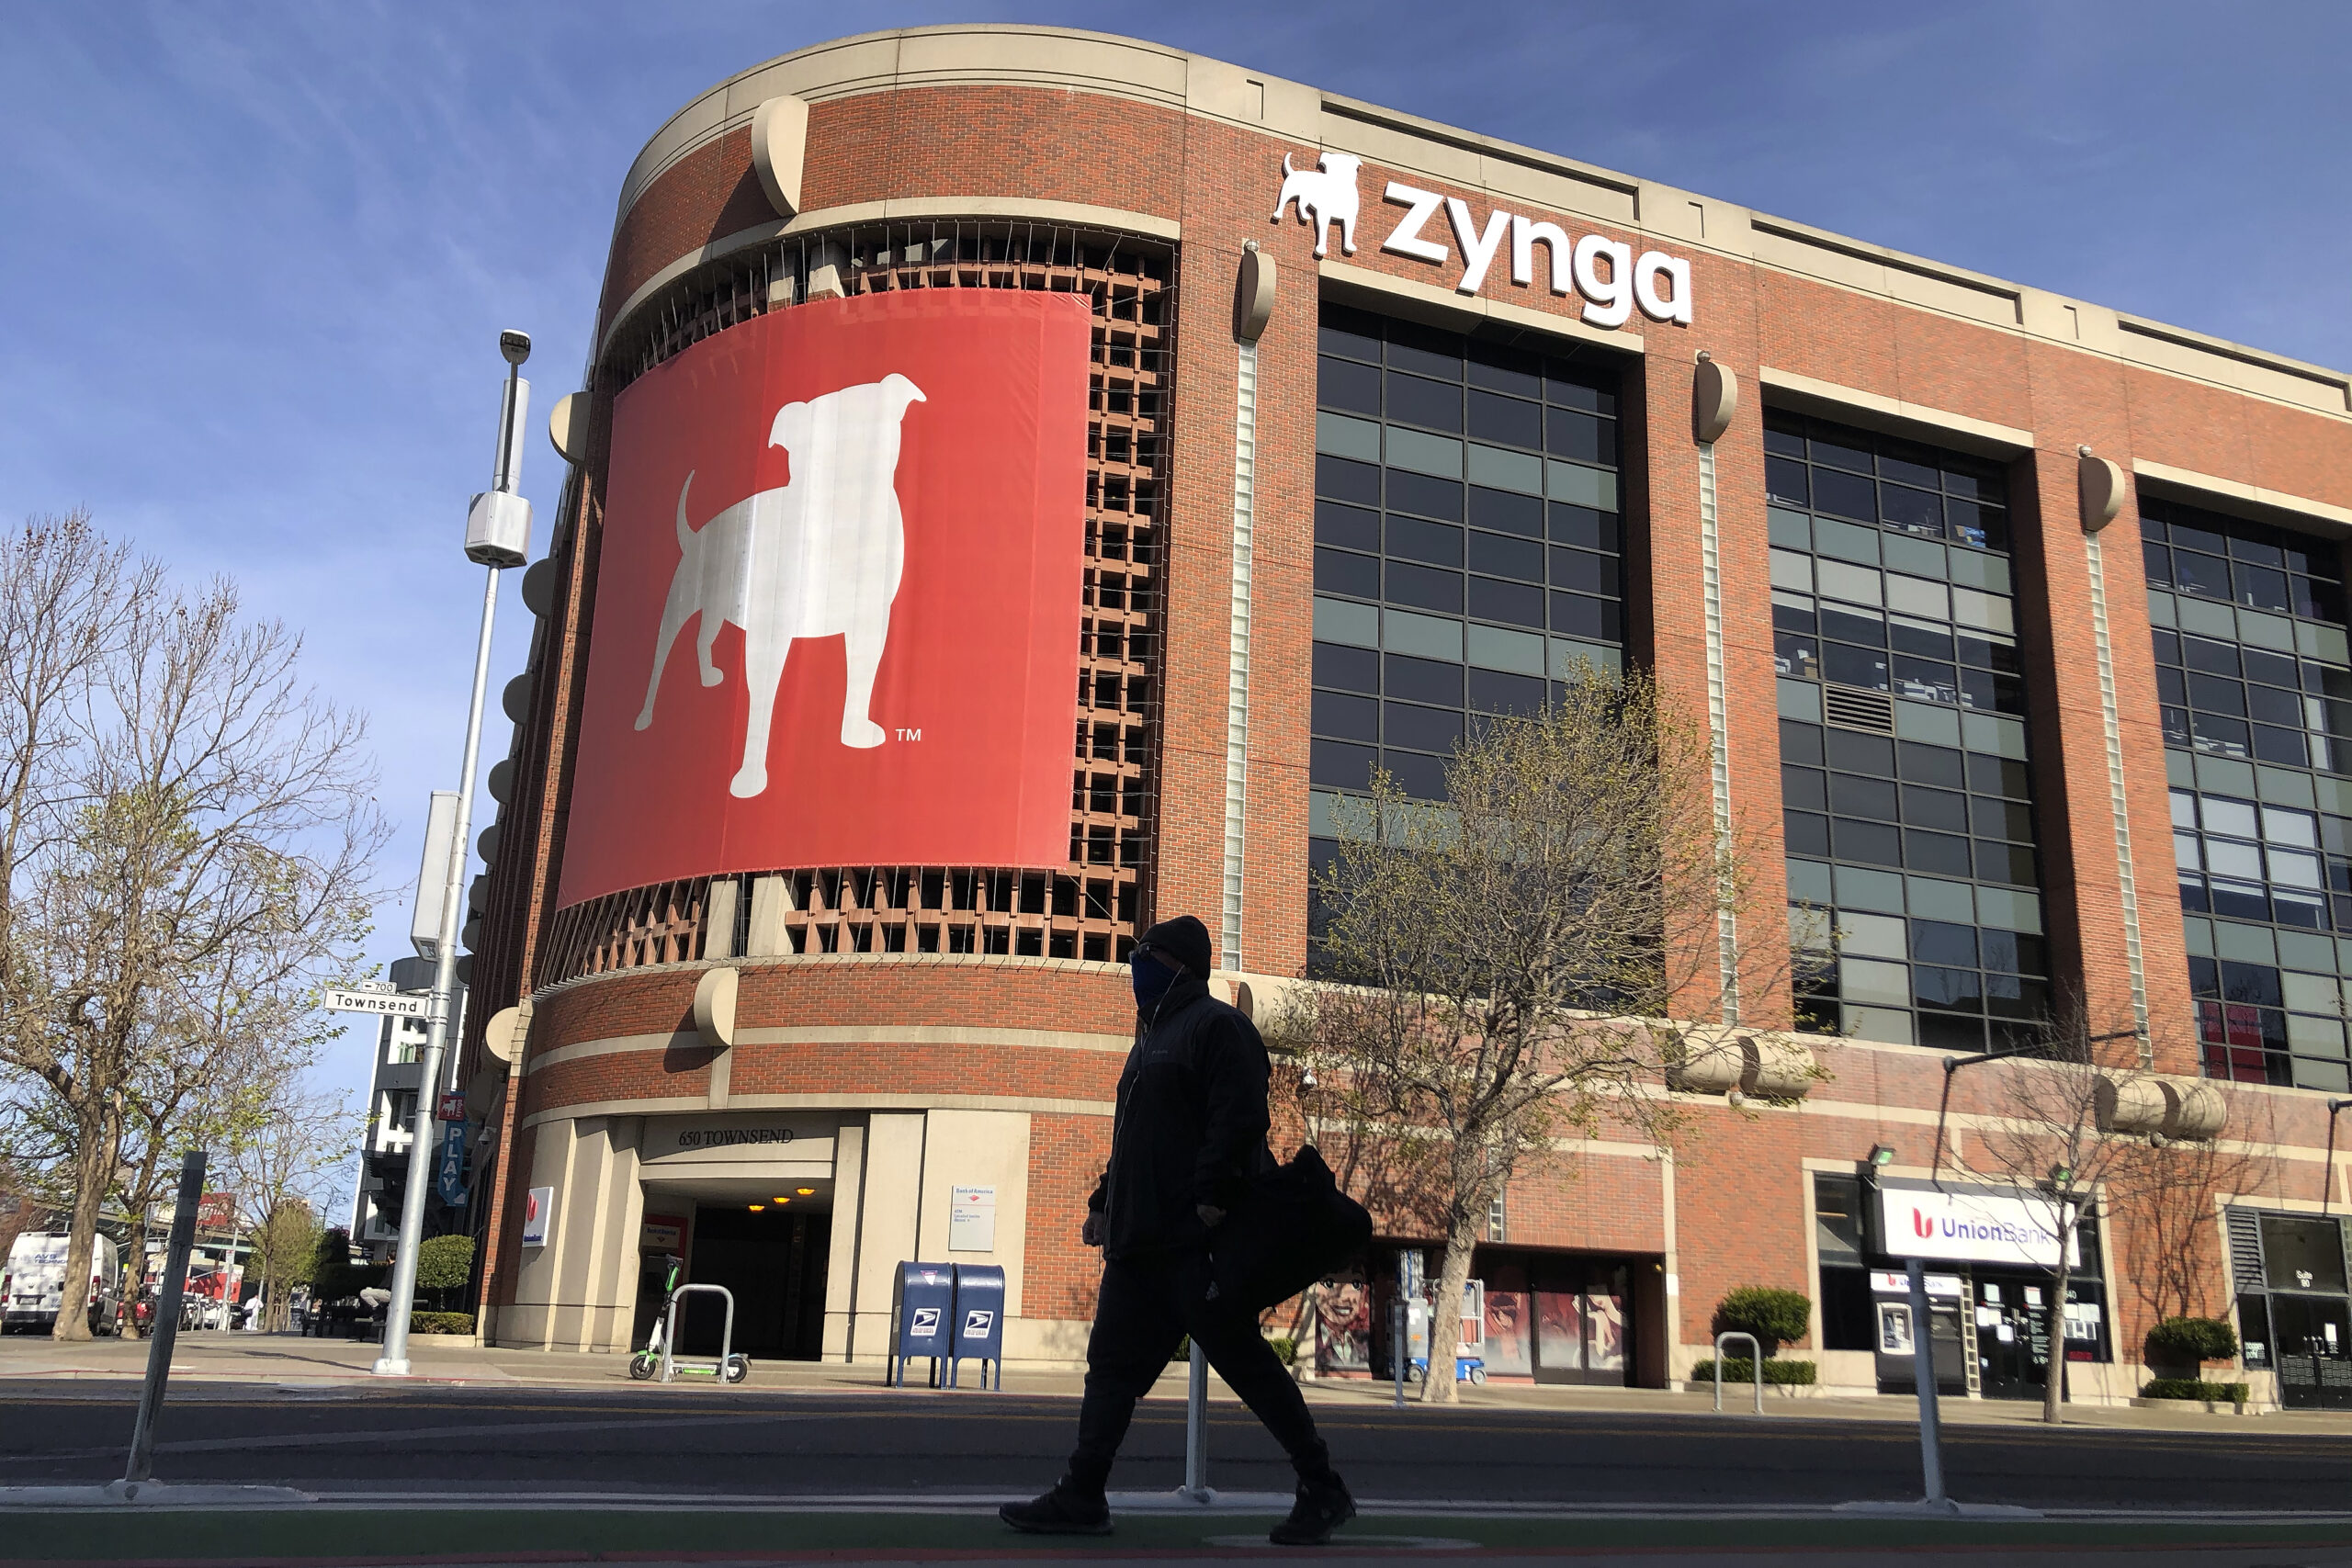 FILE - A pedestrian walks in front of a sign at Zynga in San Francisco, Tuesday, March 16, 2021. Take-Two Interactive, maker of Grand Theft Auto and Red Dead Redemption, is buying Zynga, maker of FarmVille and Words With Friends, in a cash-and-stock deal with an enterprise value of about $12.7 billion. Take-Two said Monday, Jan. 10, 2022, it anticipates $100 million in annual cost savings. (AP Photo/Jeff Chiu, File)